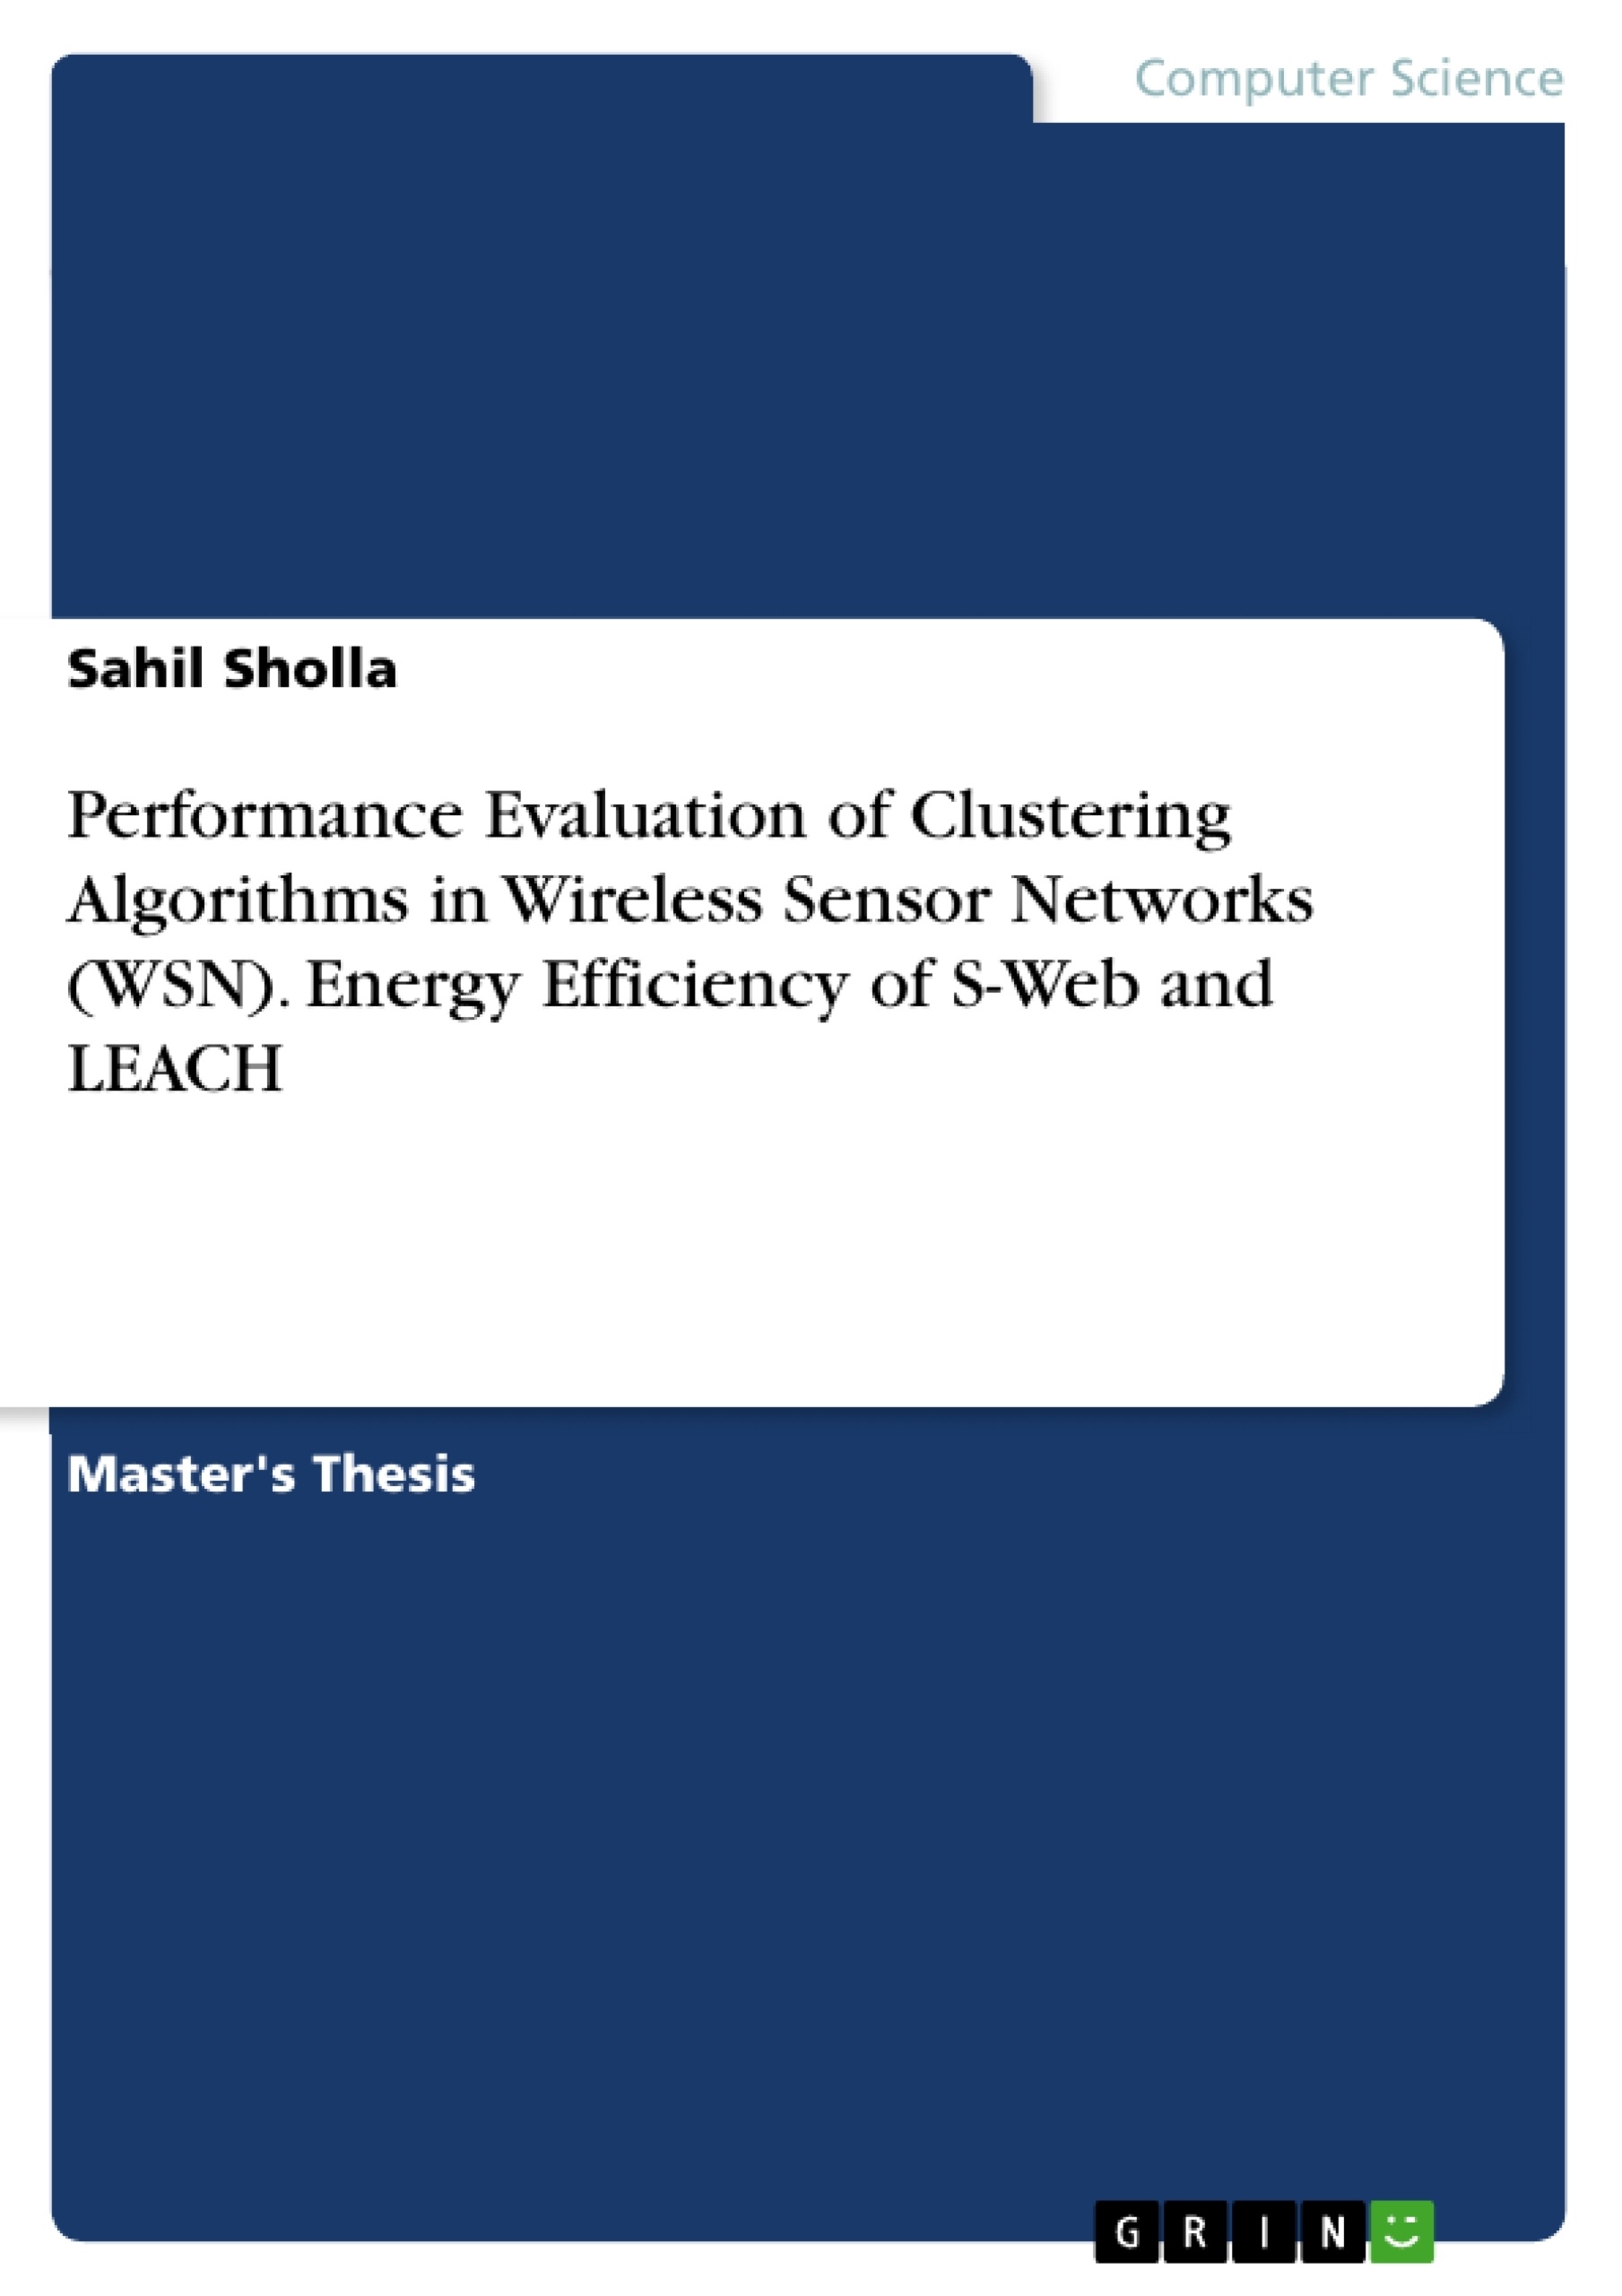 Title: Performance Evaluation of Clustering Algorithms in Wireless Sensor Networks (WSN). Energy Efficiency of S-Web and LEACH